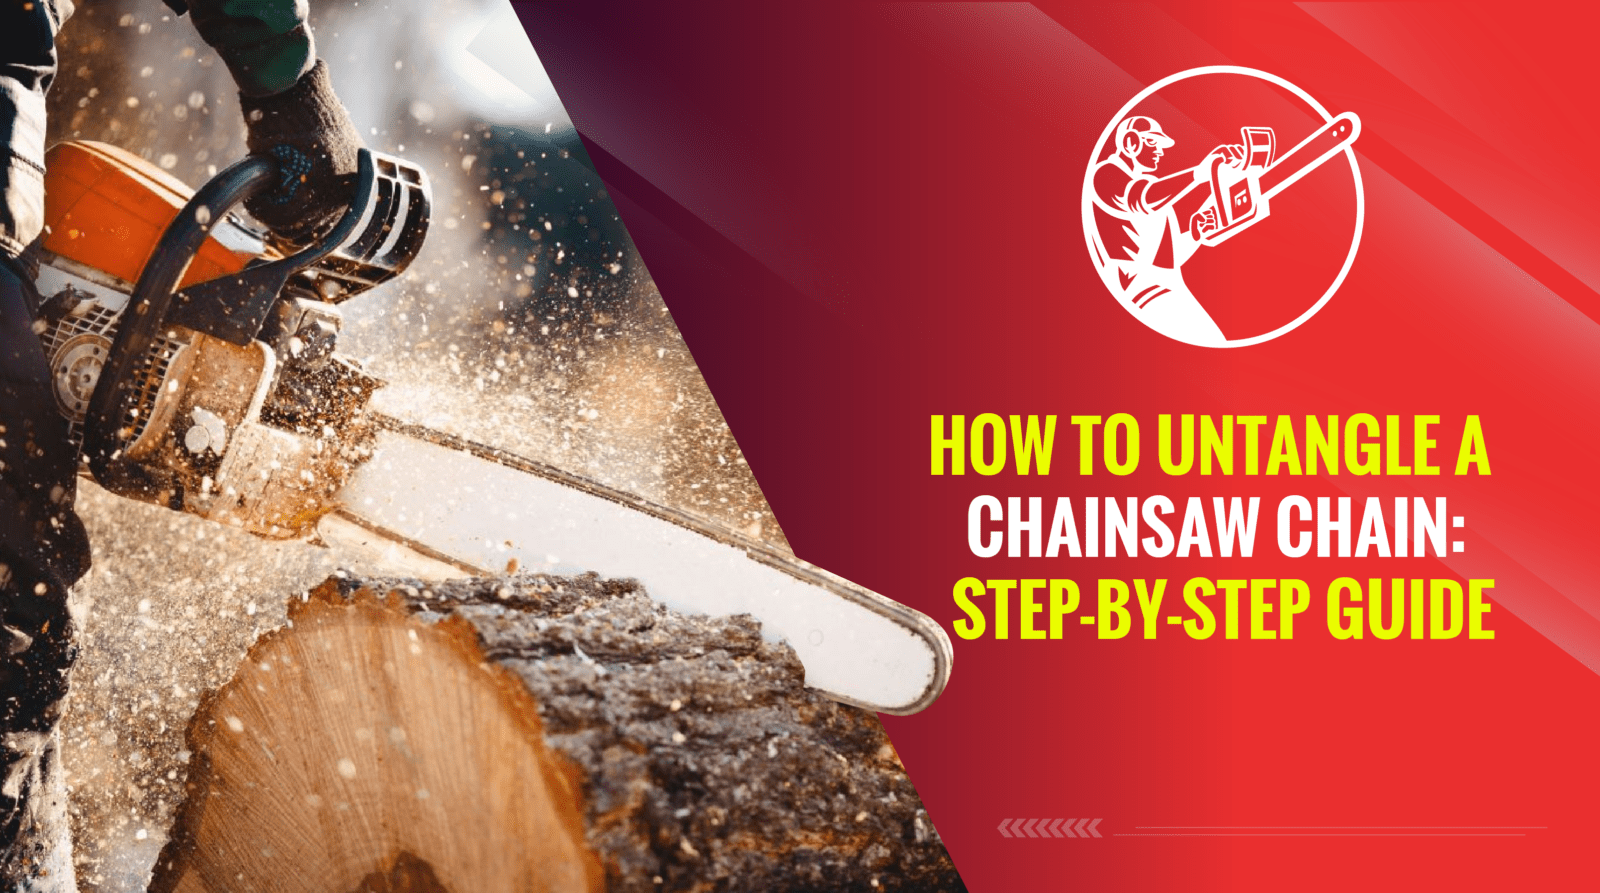 How to Untangle a Chainsaw Chain: Step-by-Step Guide